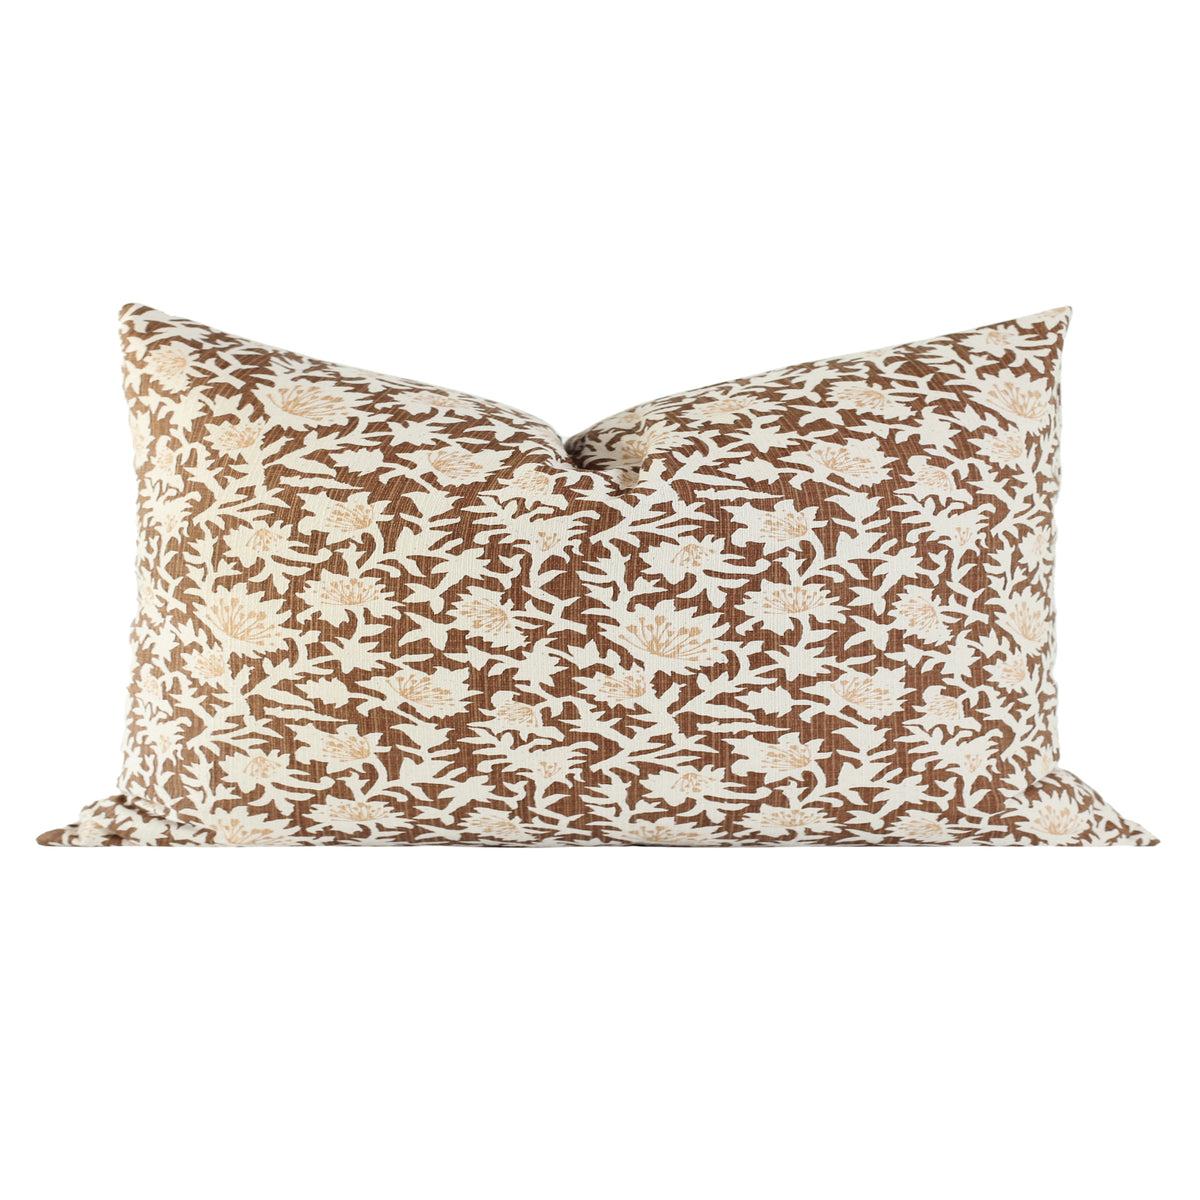 Lundie Pillow Cover